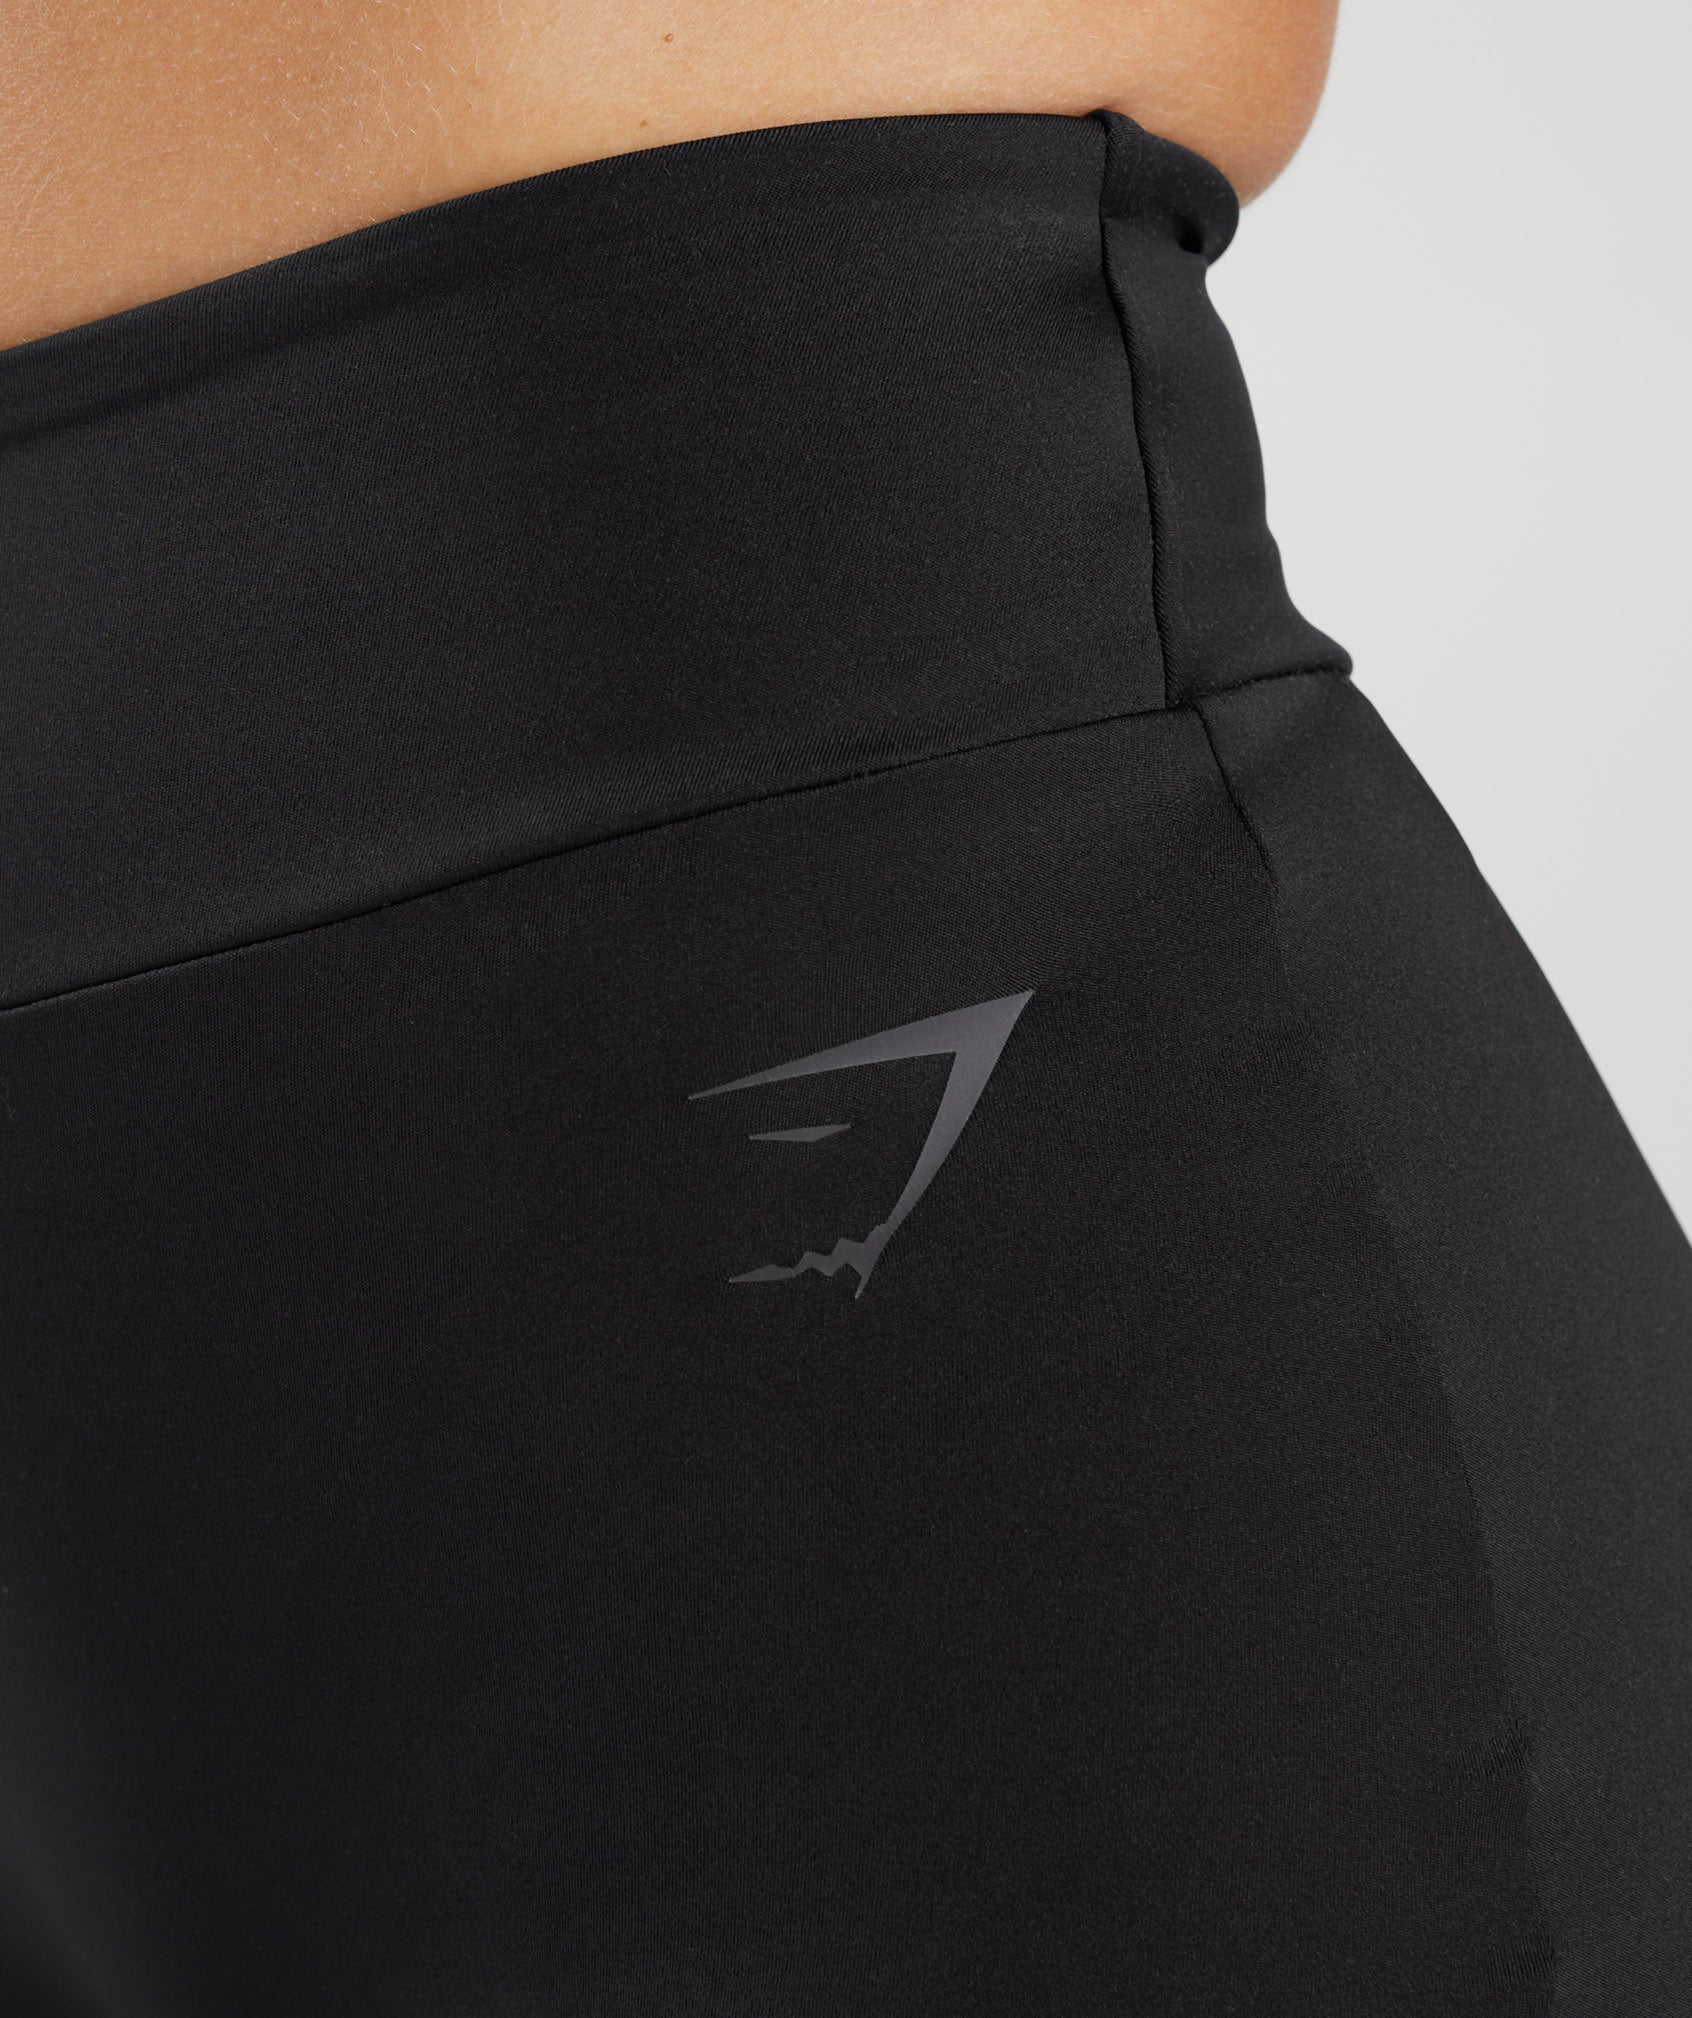 GS Power Original Tight Shorts product image 6